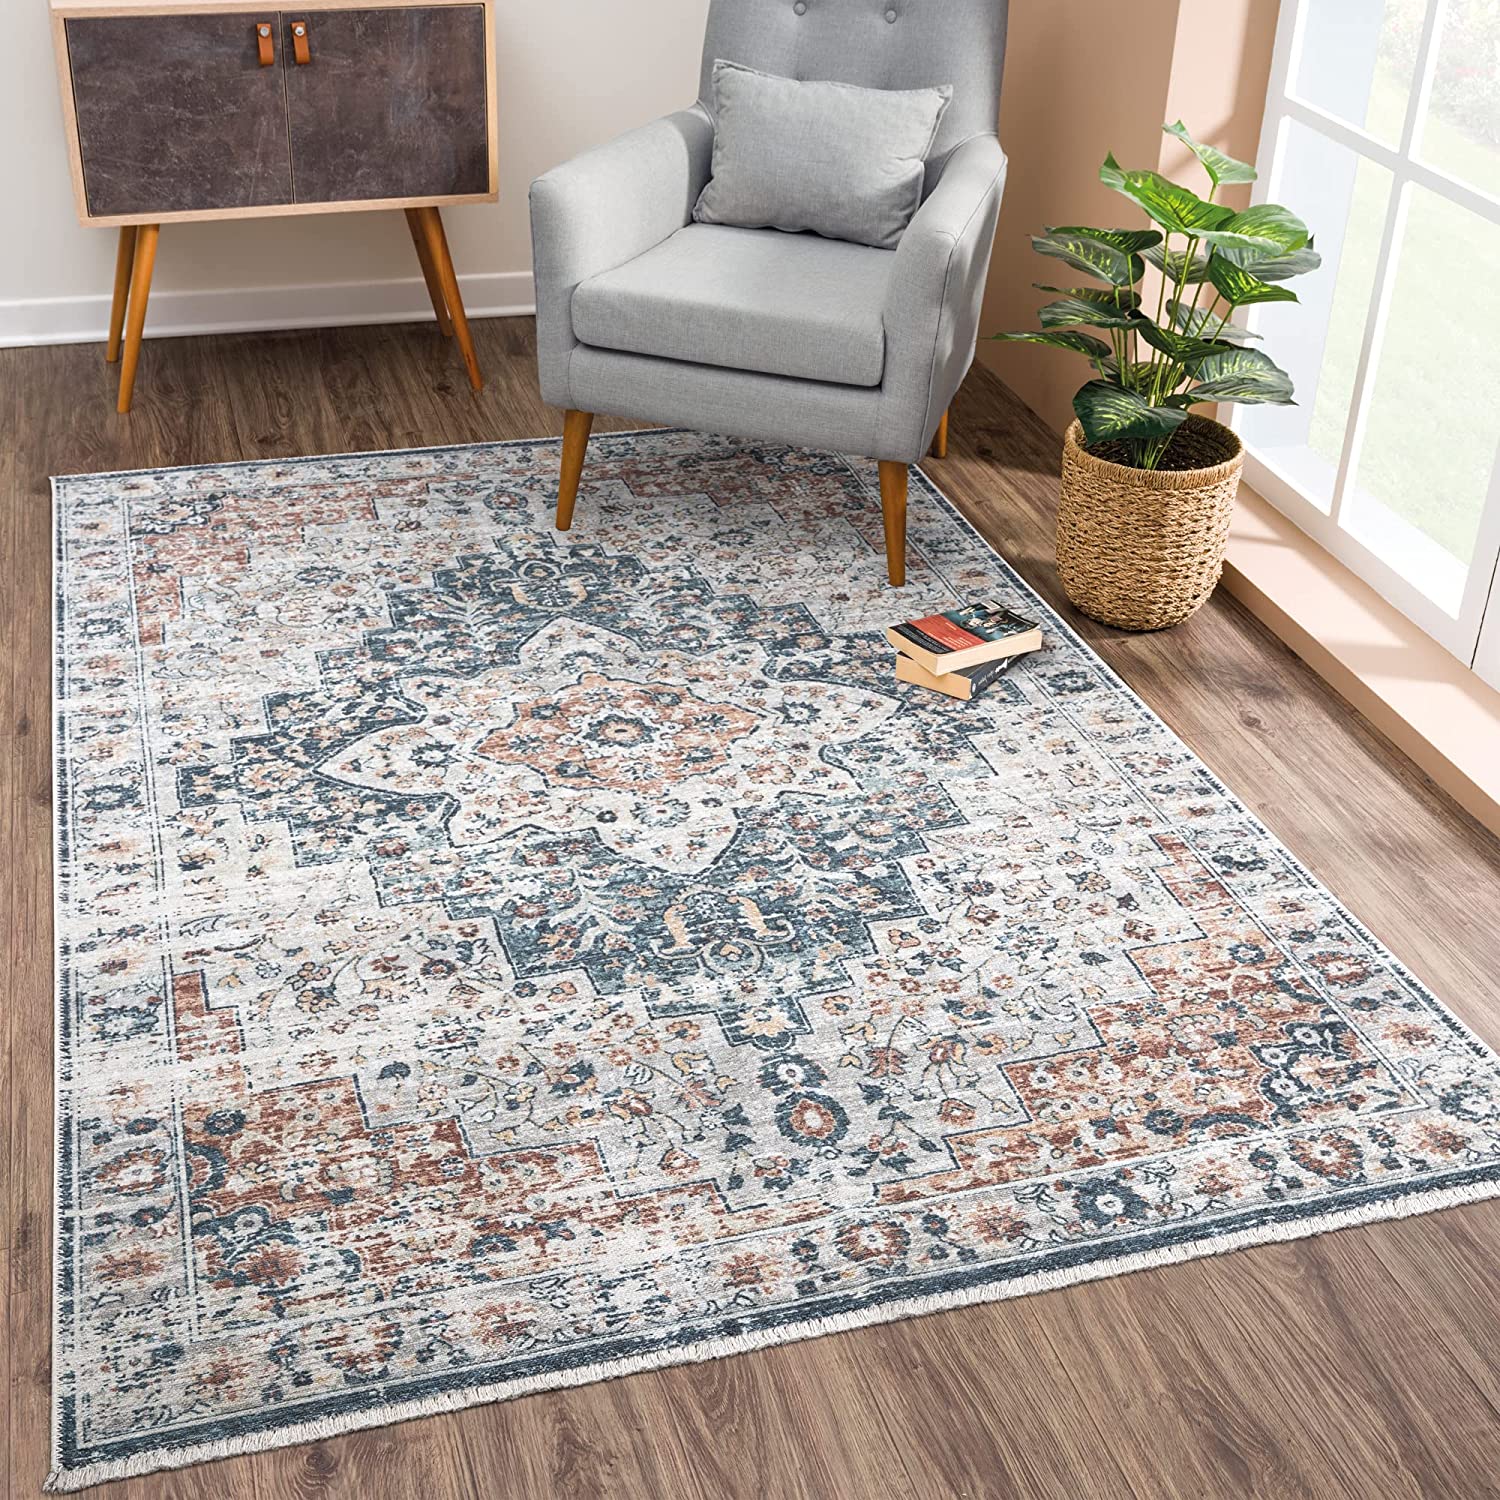 Floor_Rug_Floor_Rugs_for_Every_Budget:_Affordable_Options_for_Every_Style